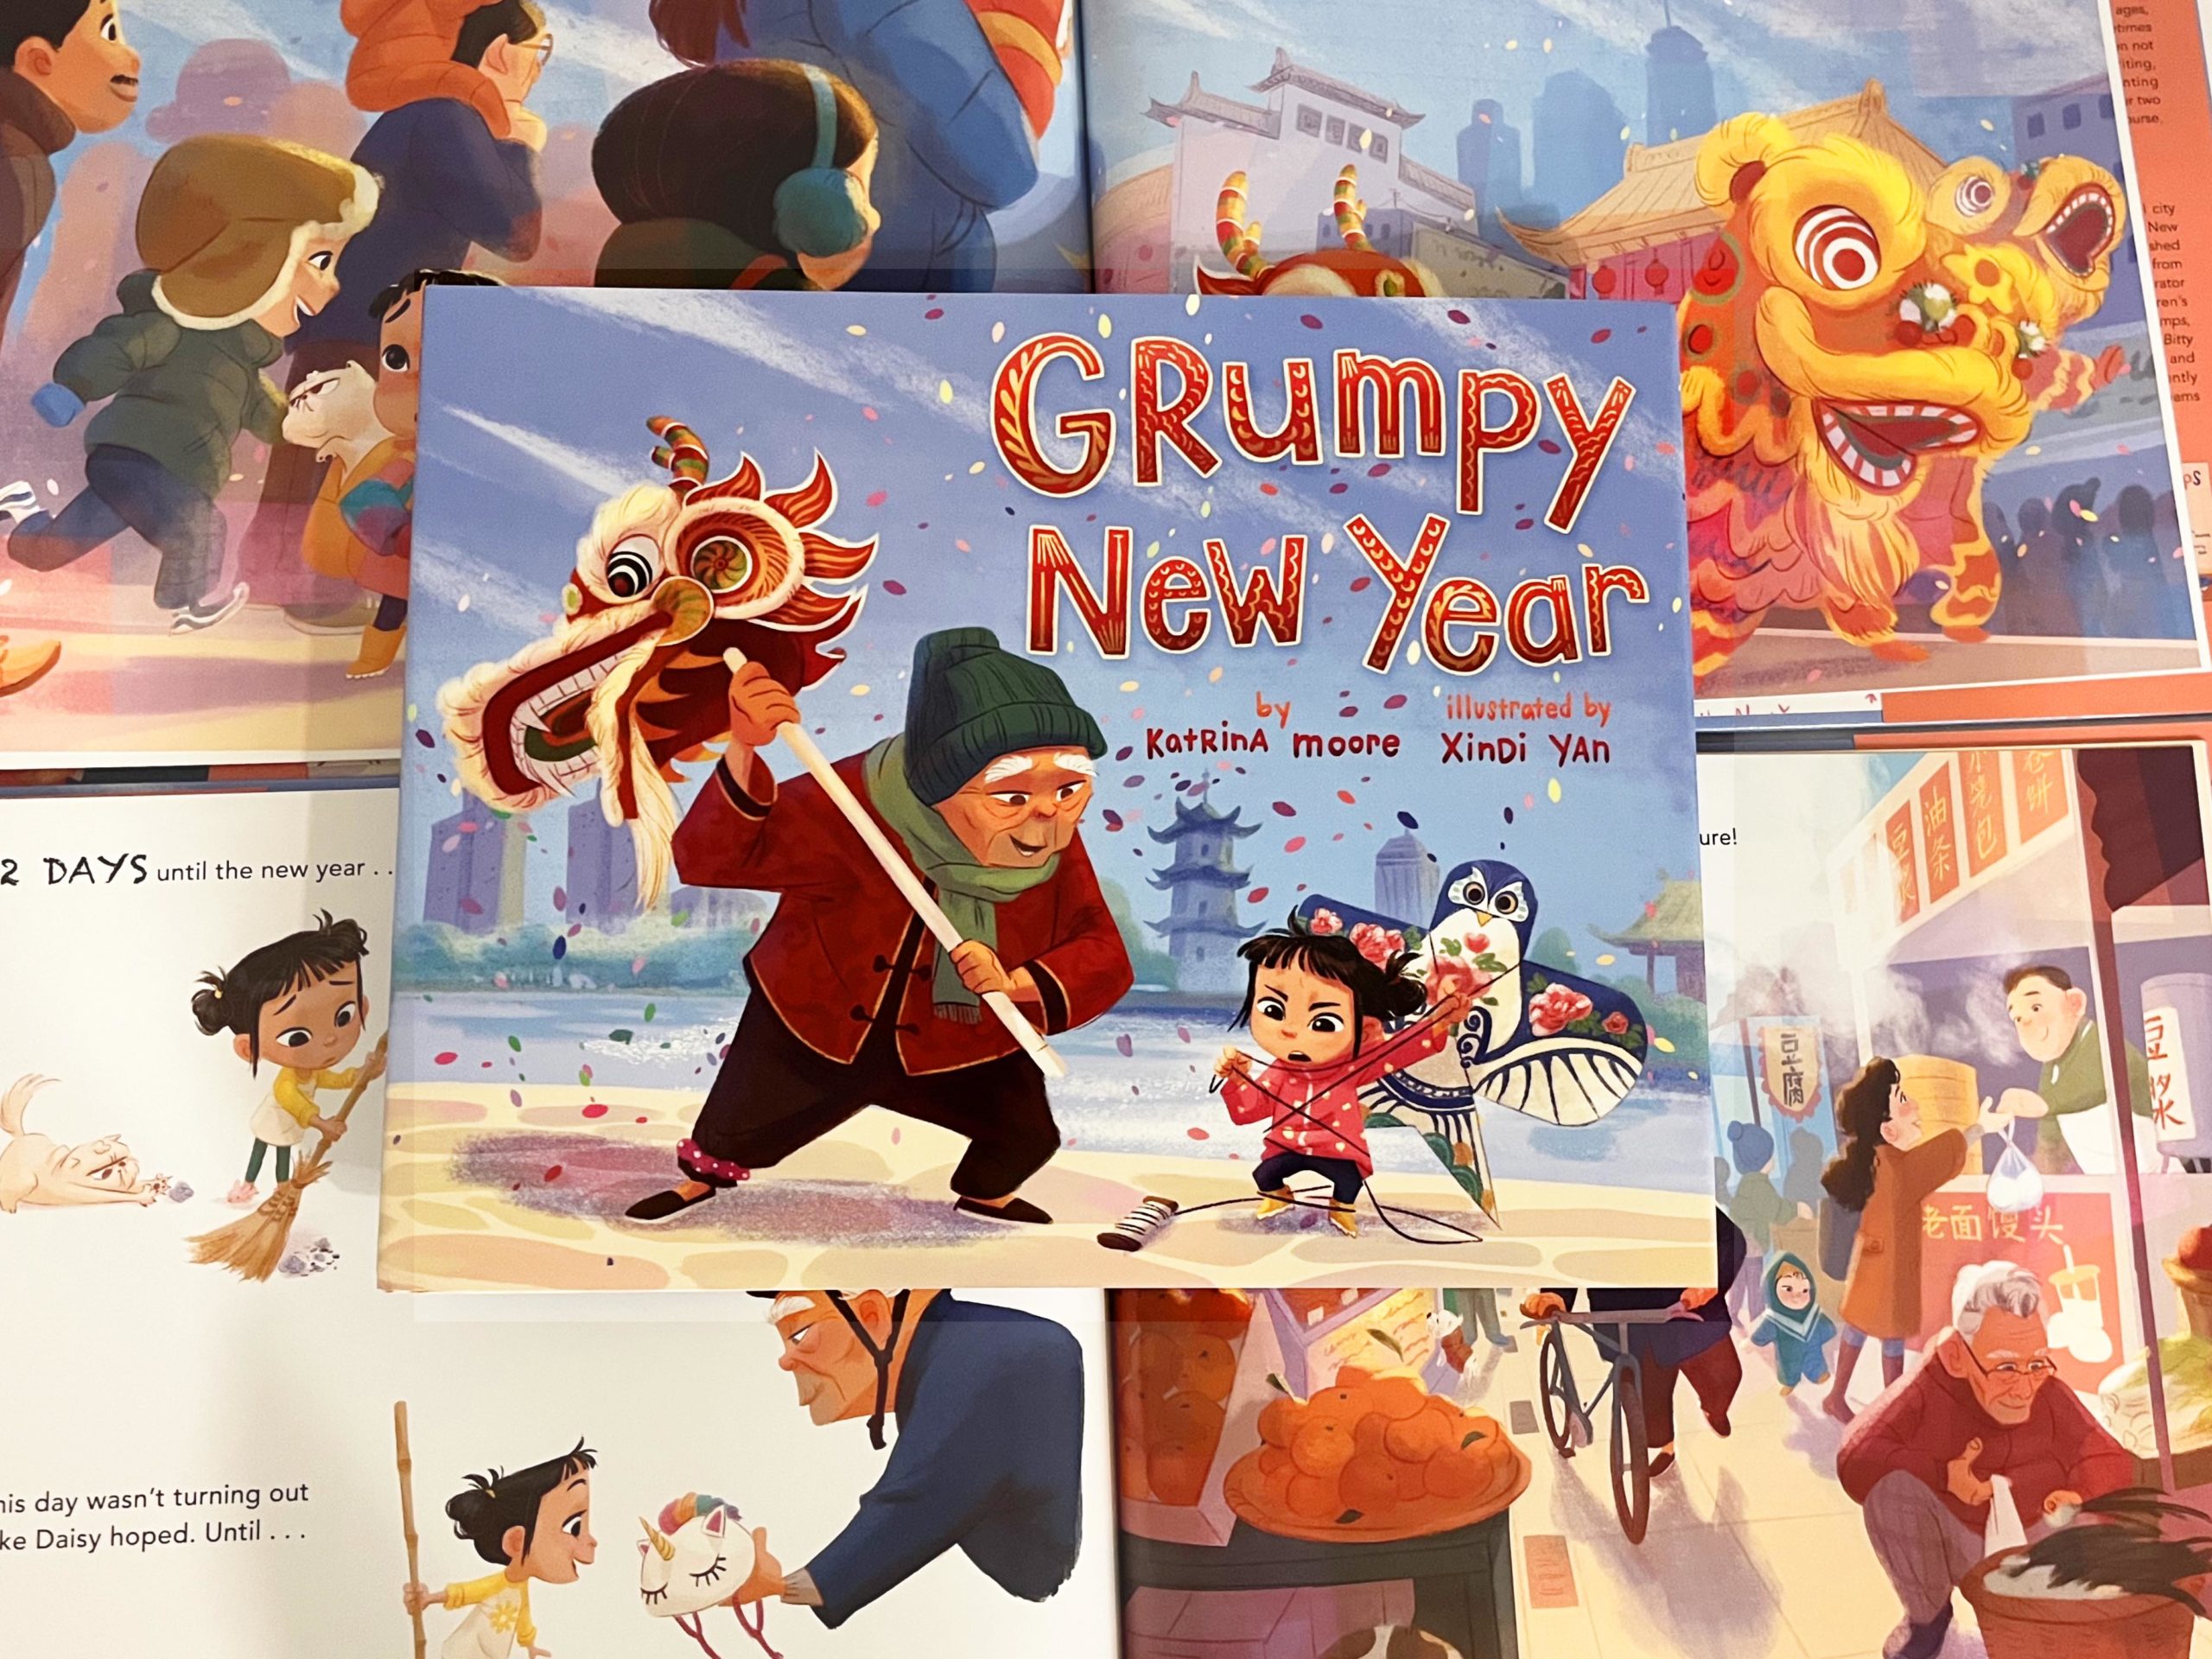 Cover of Grumpy New Year with page spreads behind